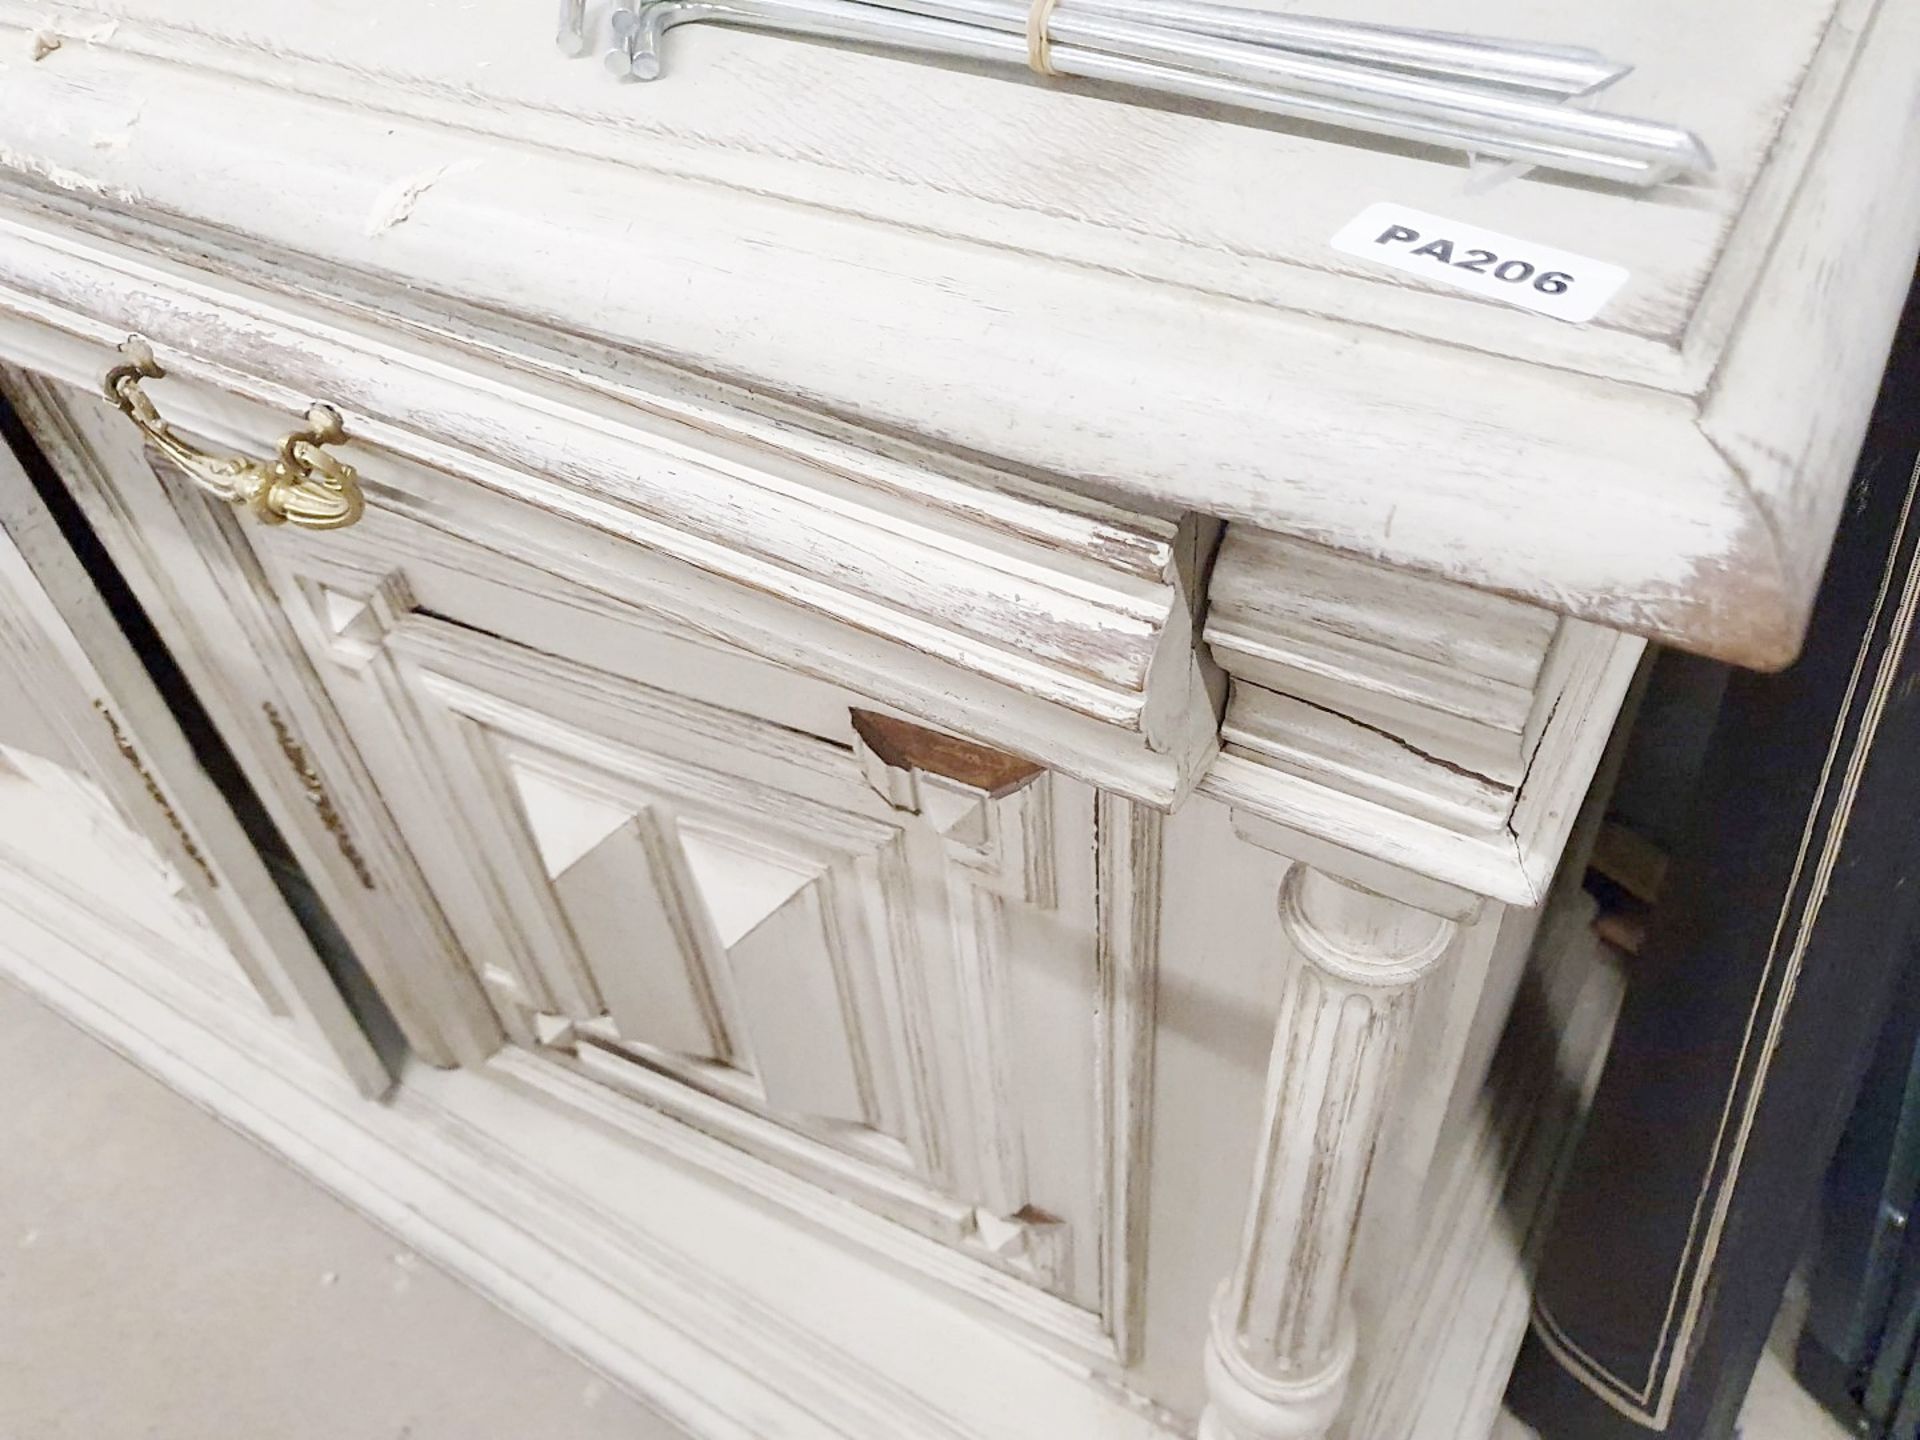 1 x Shabby Chic Dresser in Distressed White - H102/205 x W147 x D66 cms - Ref PA206 - CL463 - - Image 3 of 9